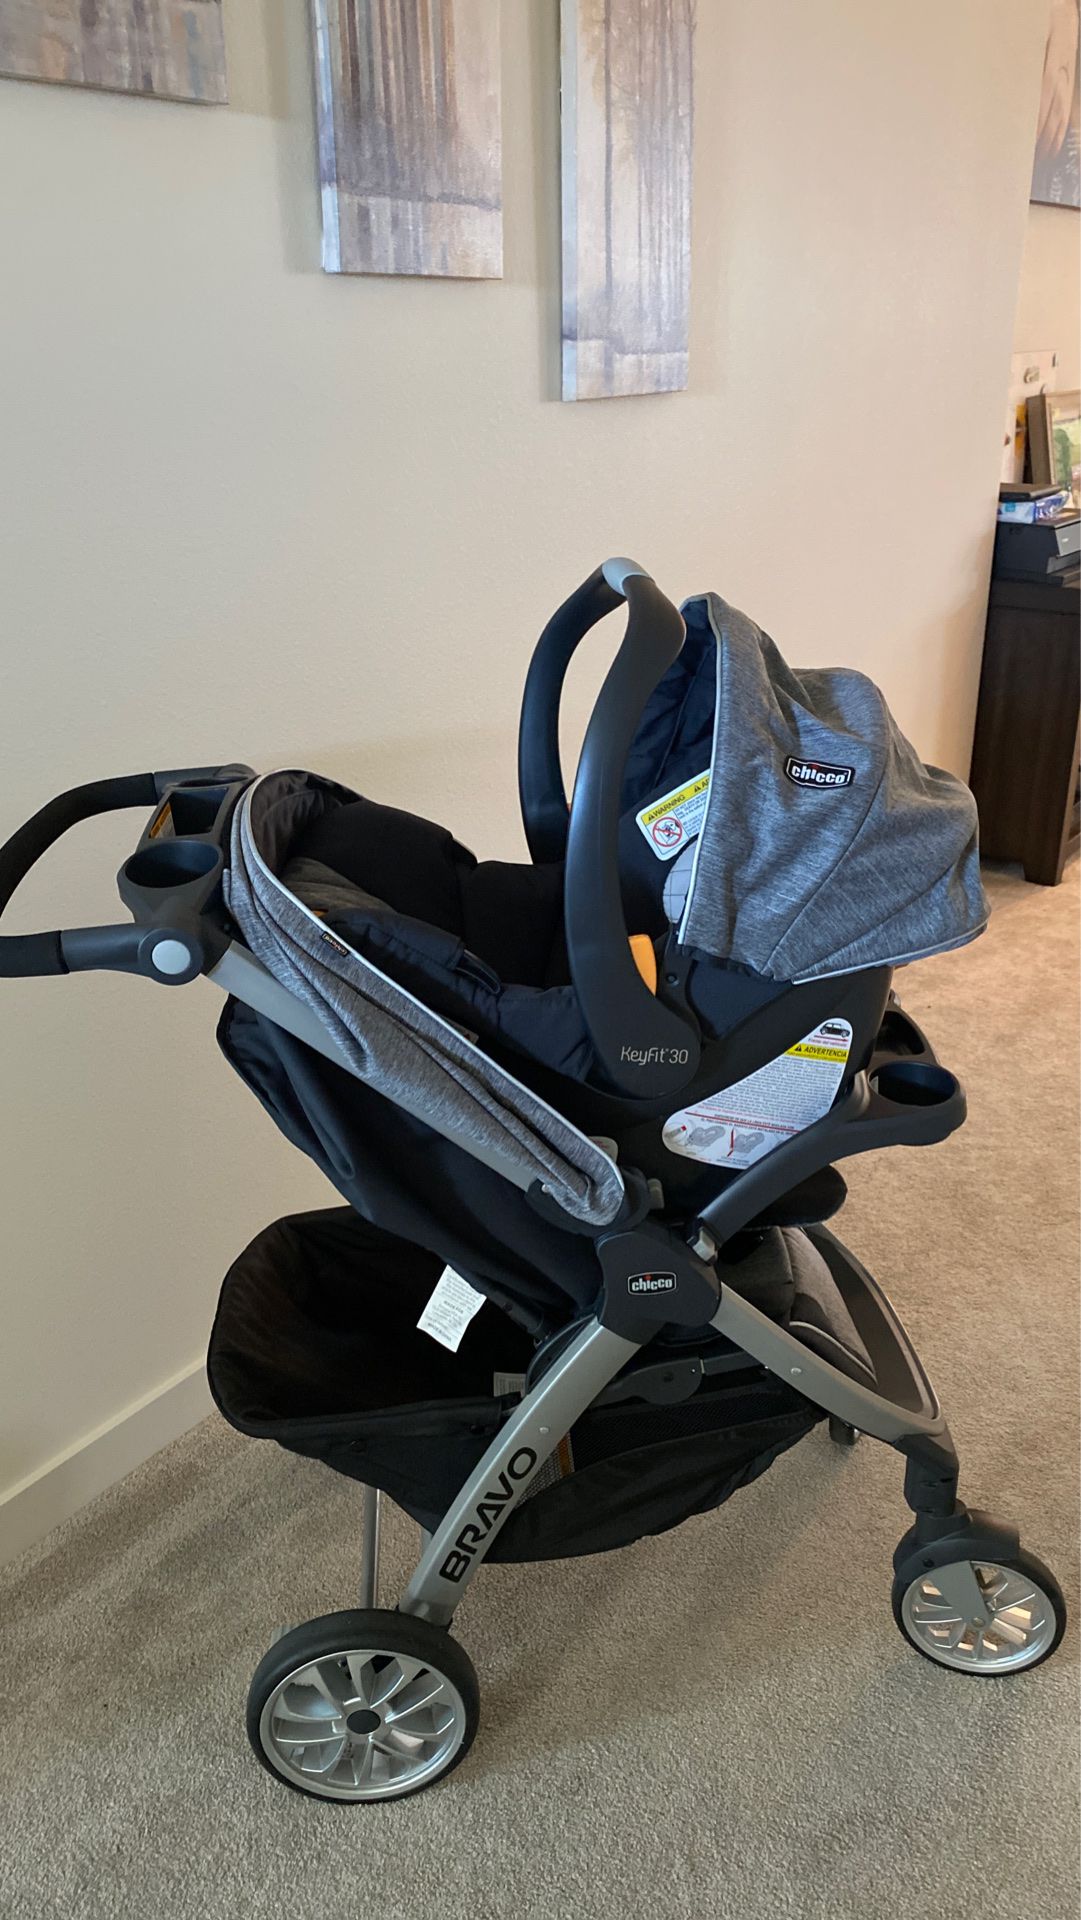 Chicco stroller, car seat and base